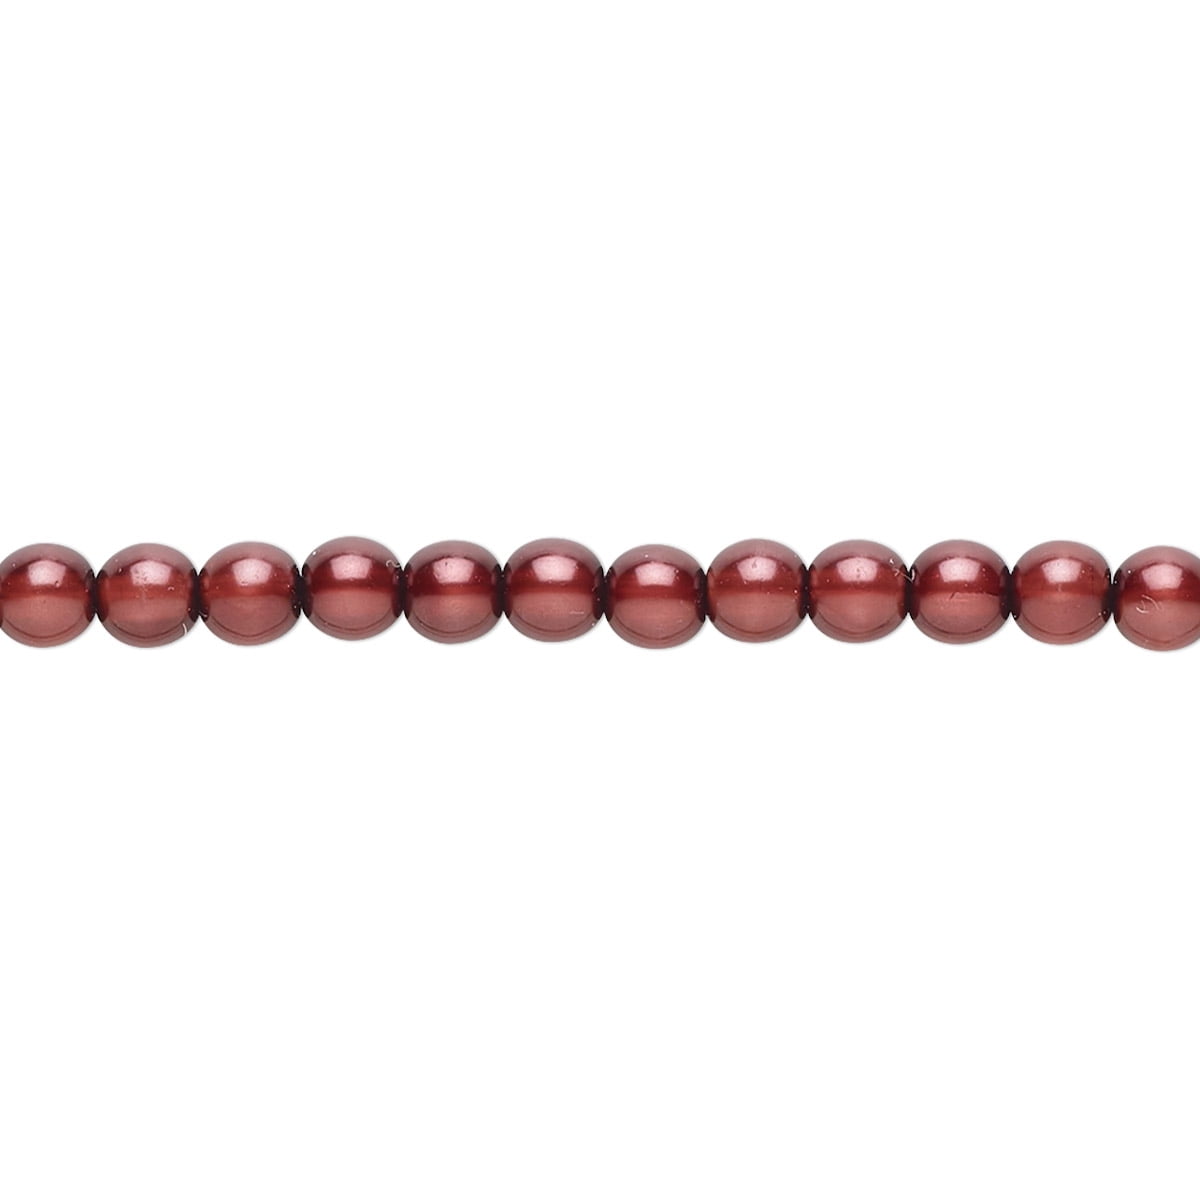 Jewelry Matte Burgundy and 4mm ; Wine; Bead Embroidery Bead Weaving 120 beads 150 beads Czech Glass Round Pearl Beads CHOOSE SIZE: 2mm